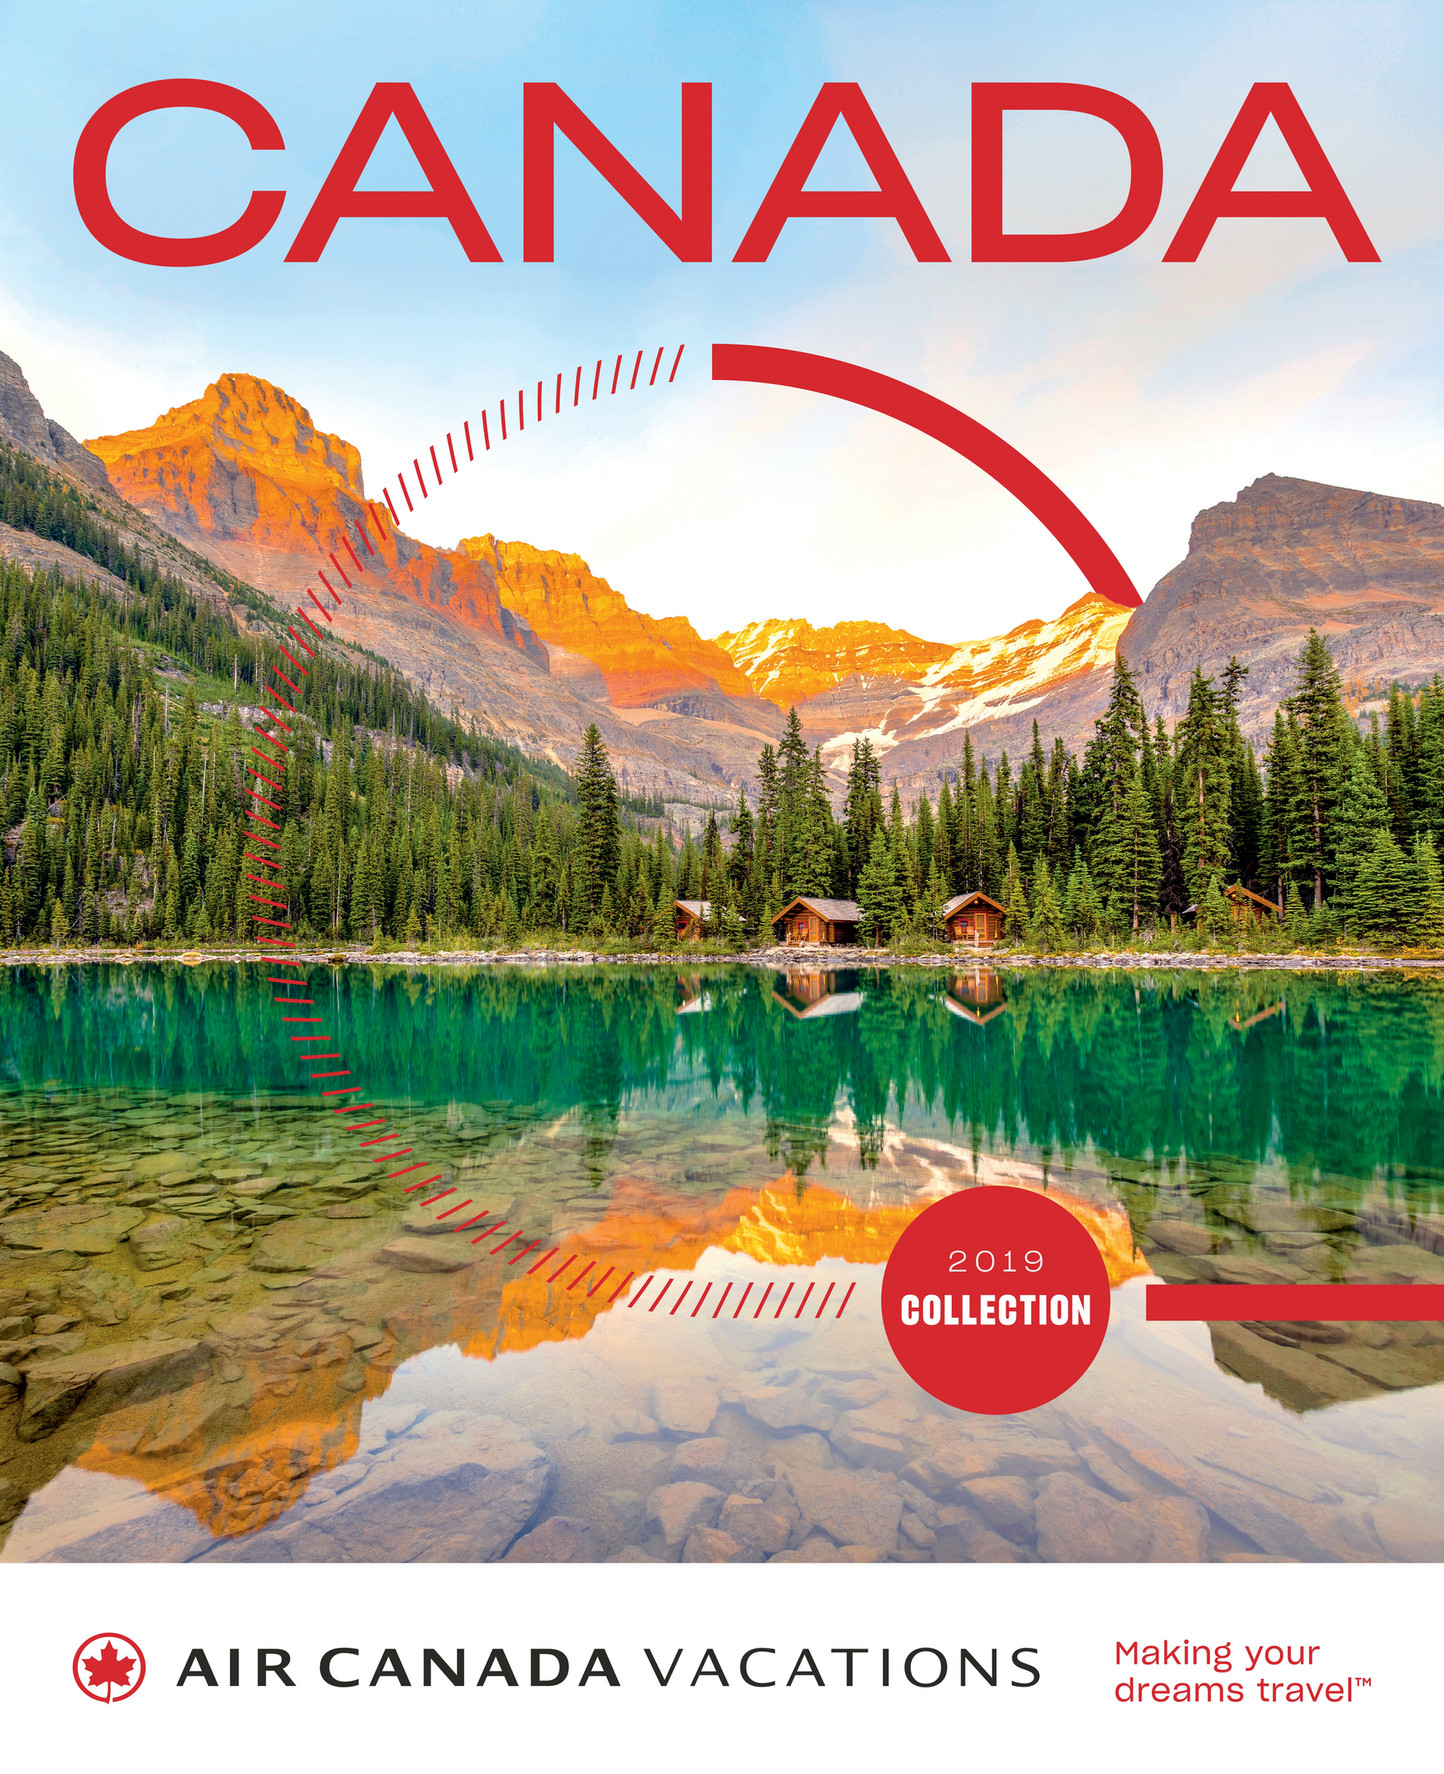 Air Canada Vacations CanadaBrochure2019_EN Page 1 Created with